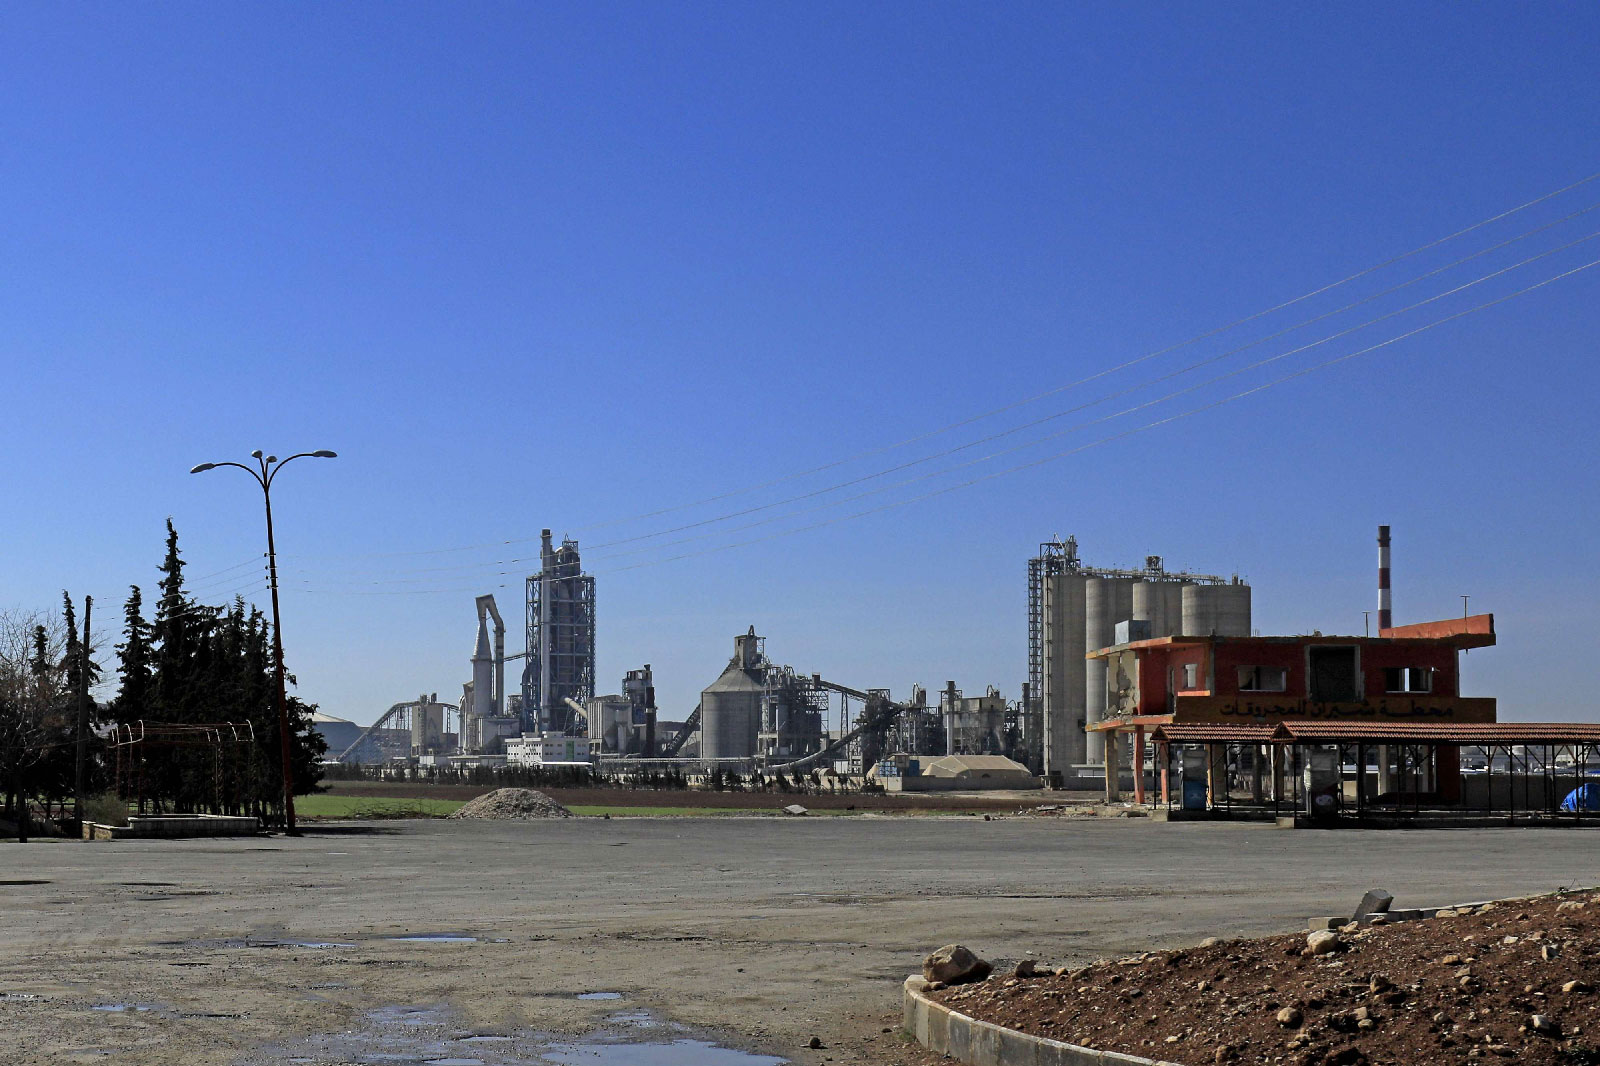 Lafarge Cement Syria (LCS) cement plant in Jalabiya, Syria on February 19, 2018.